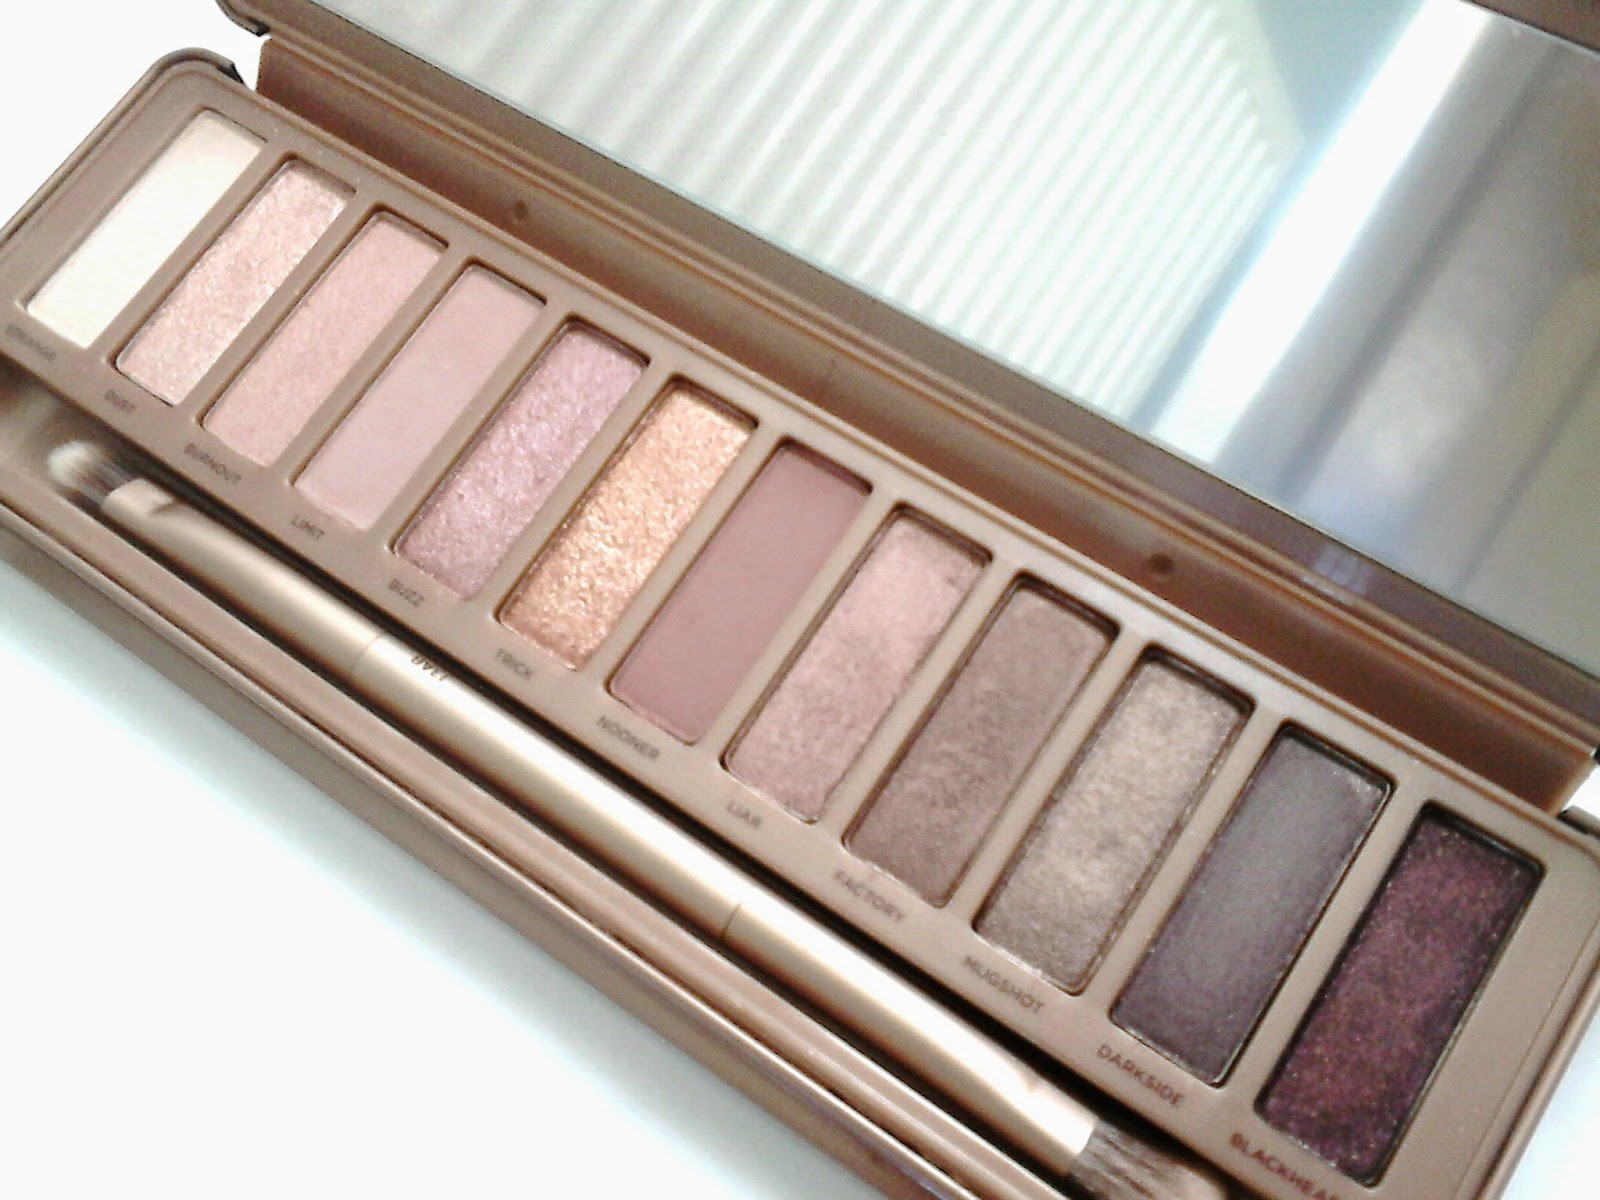 Naked 3 by Urban Decay | Tommy Beauty Pro